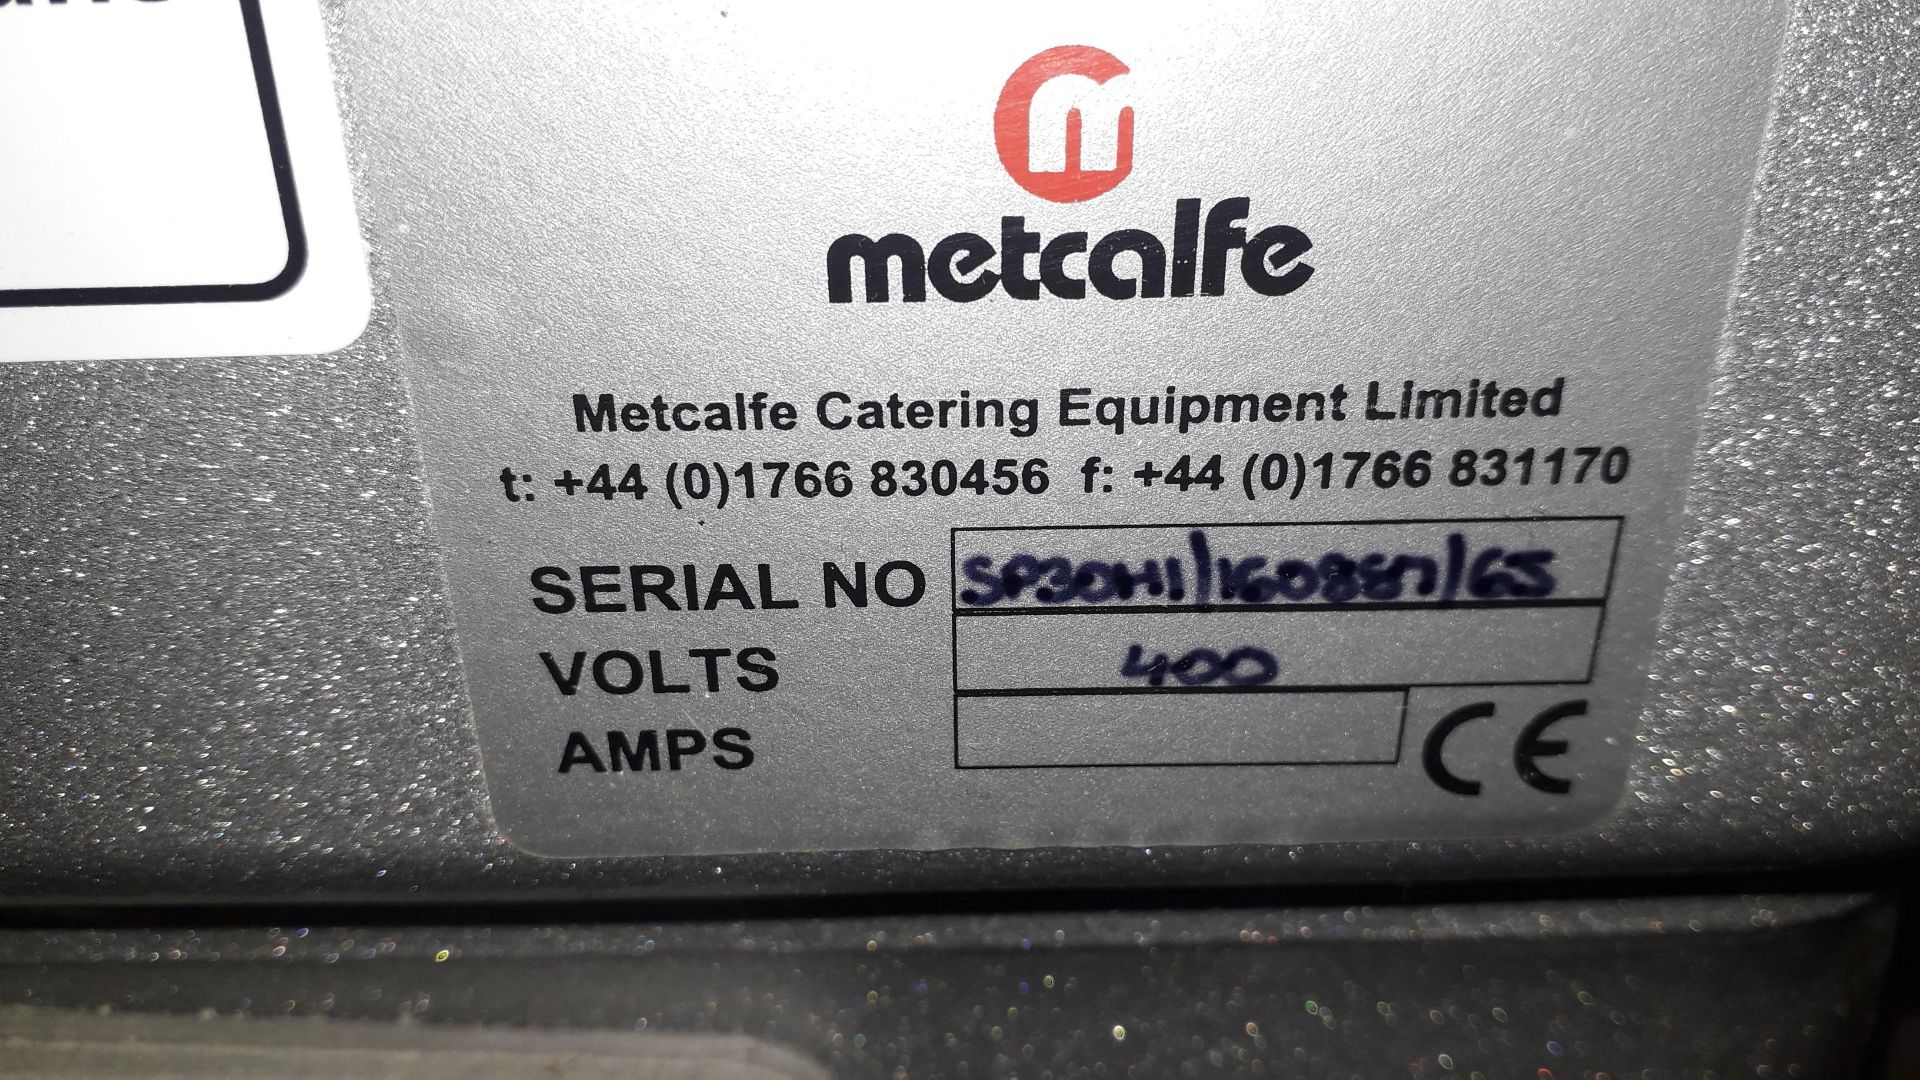 Metcalfe Stainless Steel 30Ltr Heavy Duty Spiral Dough Mixer Serial Number SP30HI/160887/GS 415v, - Image 5 of 6